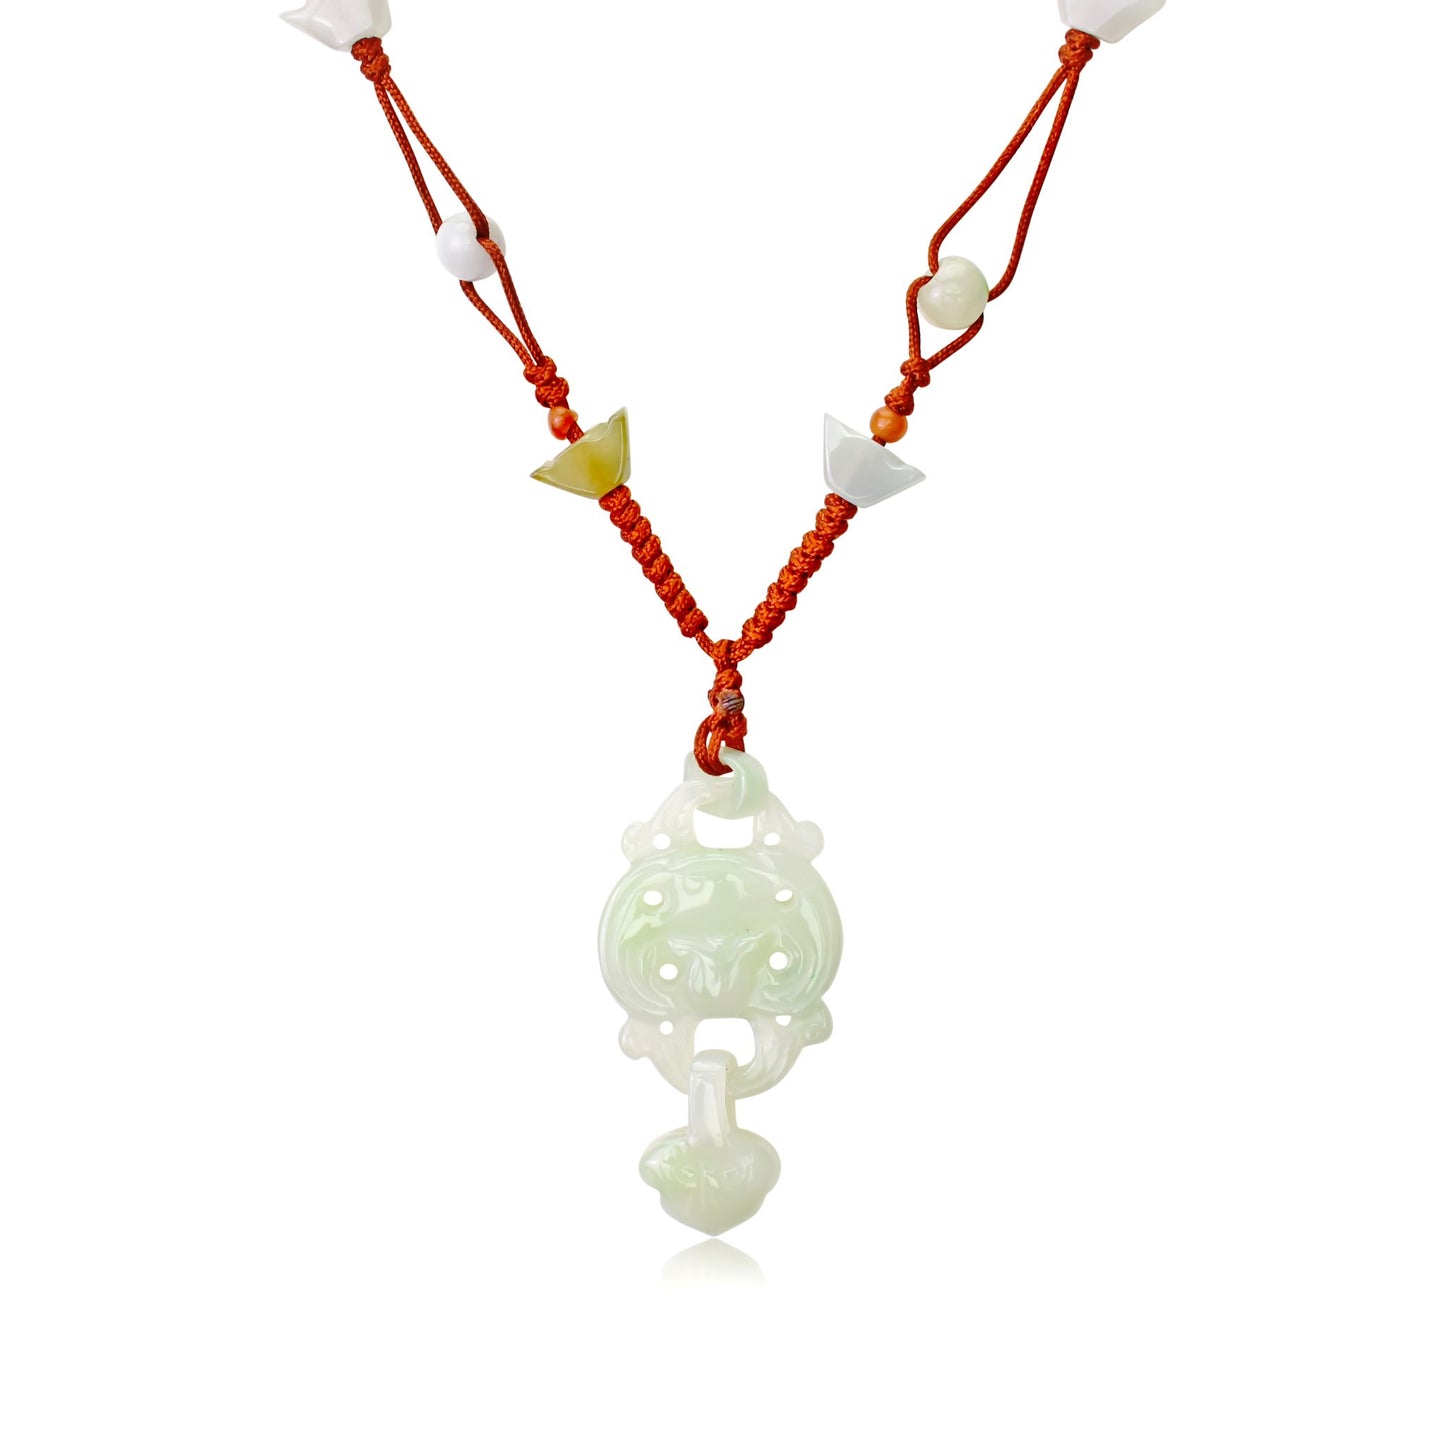 Elevate your Luck with Bat and Heart Handmade Jade Necklace Pendant made with Light Brown Cord